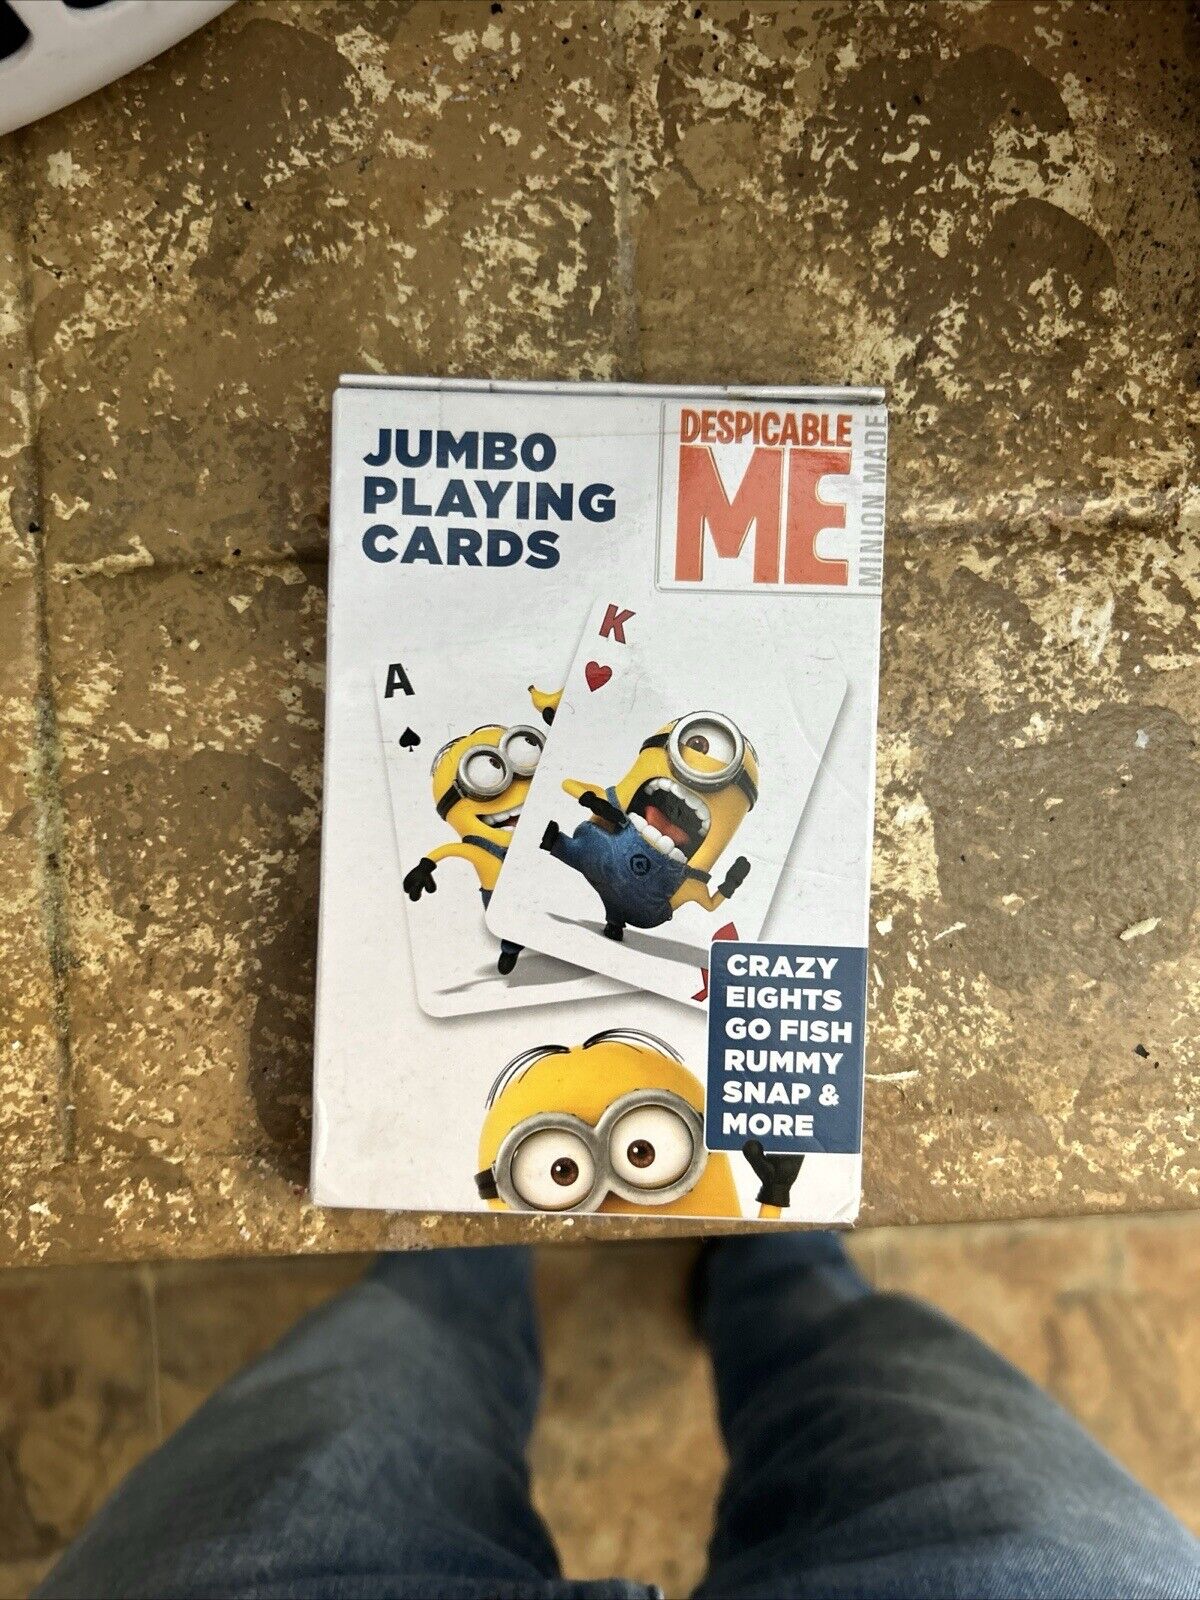 Despicable Me Jumbo Playing Cards